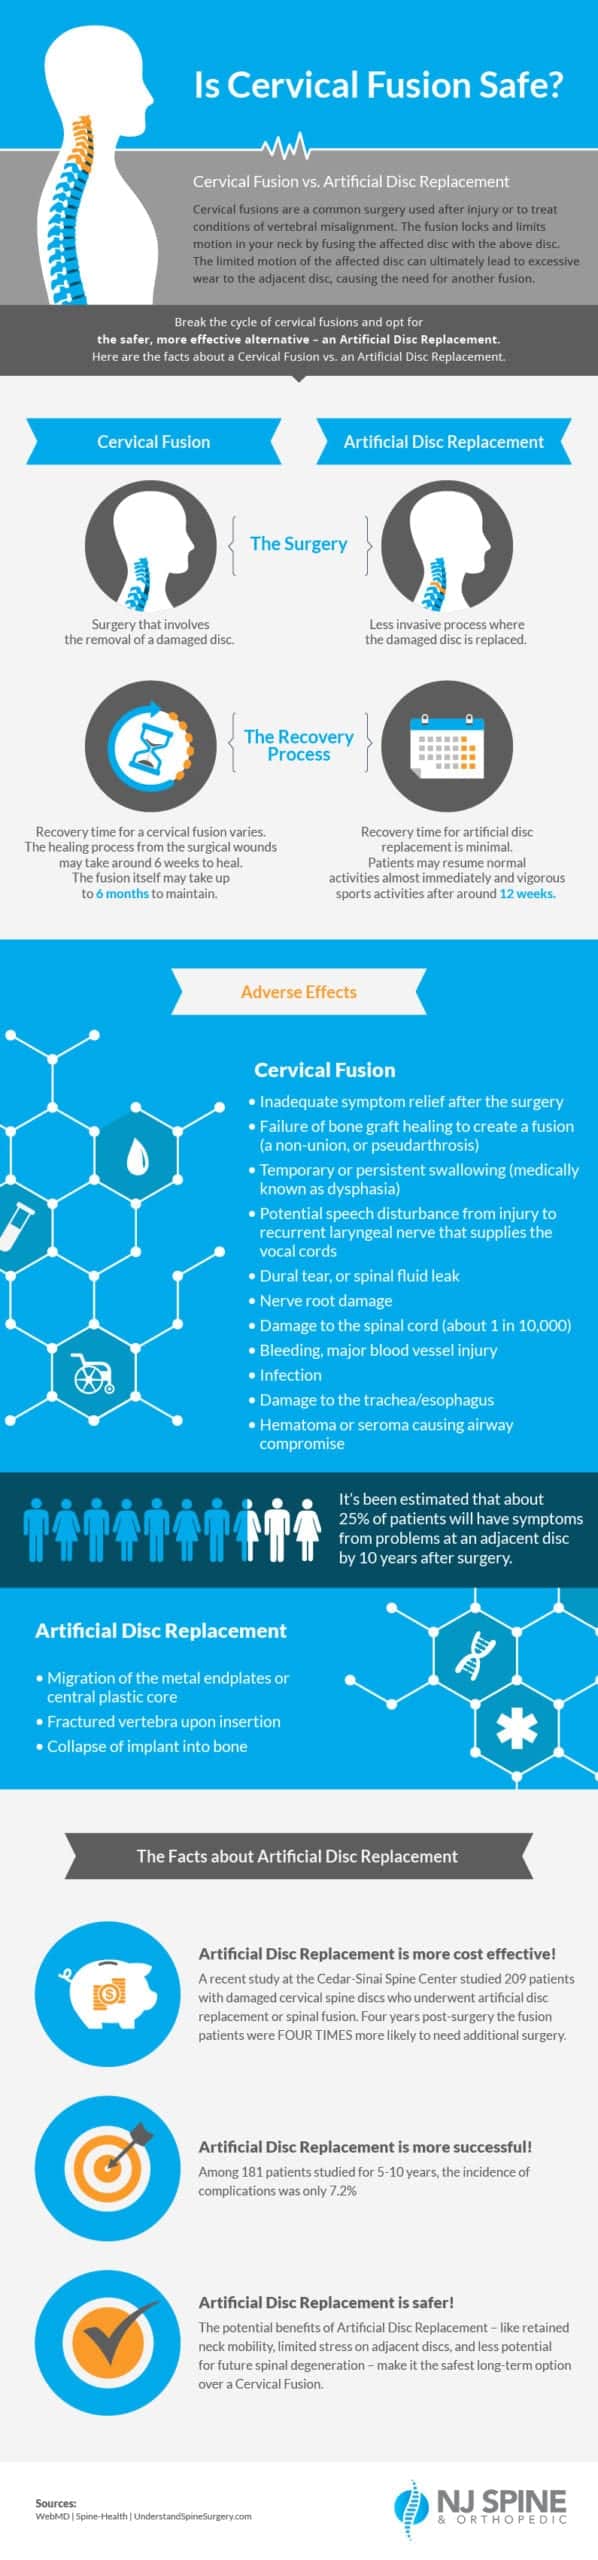 Is Cervical Fusion Safe? infographic